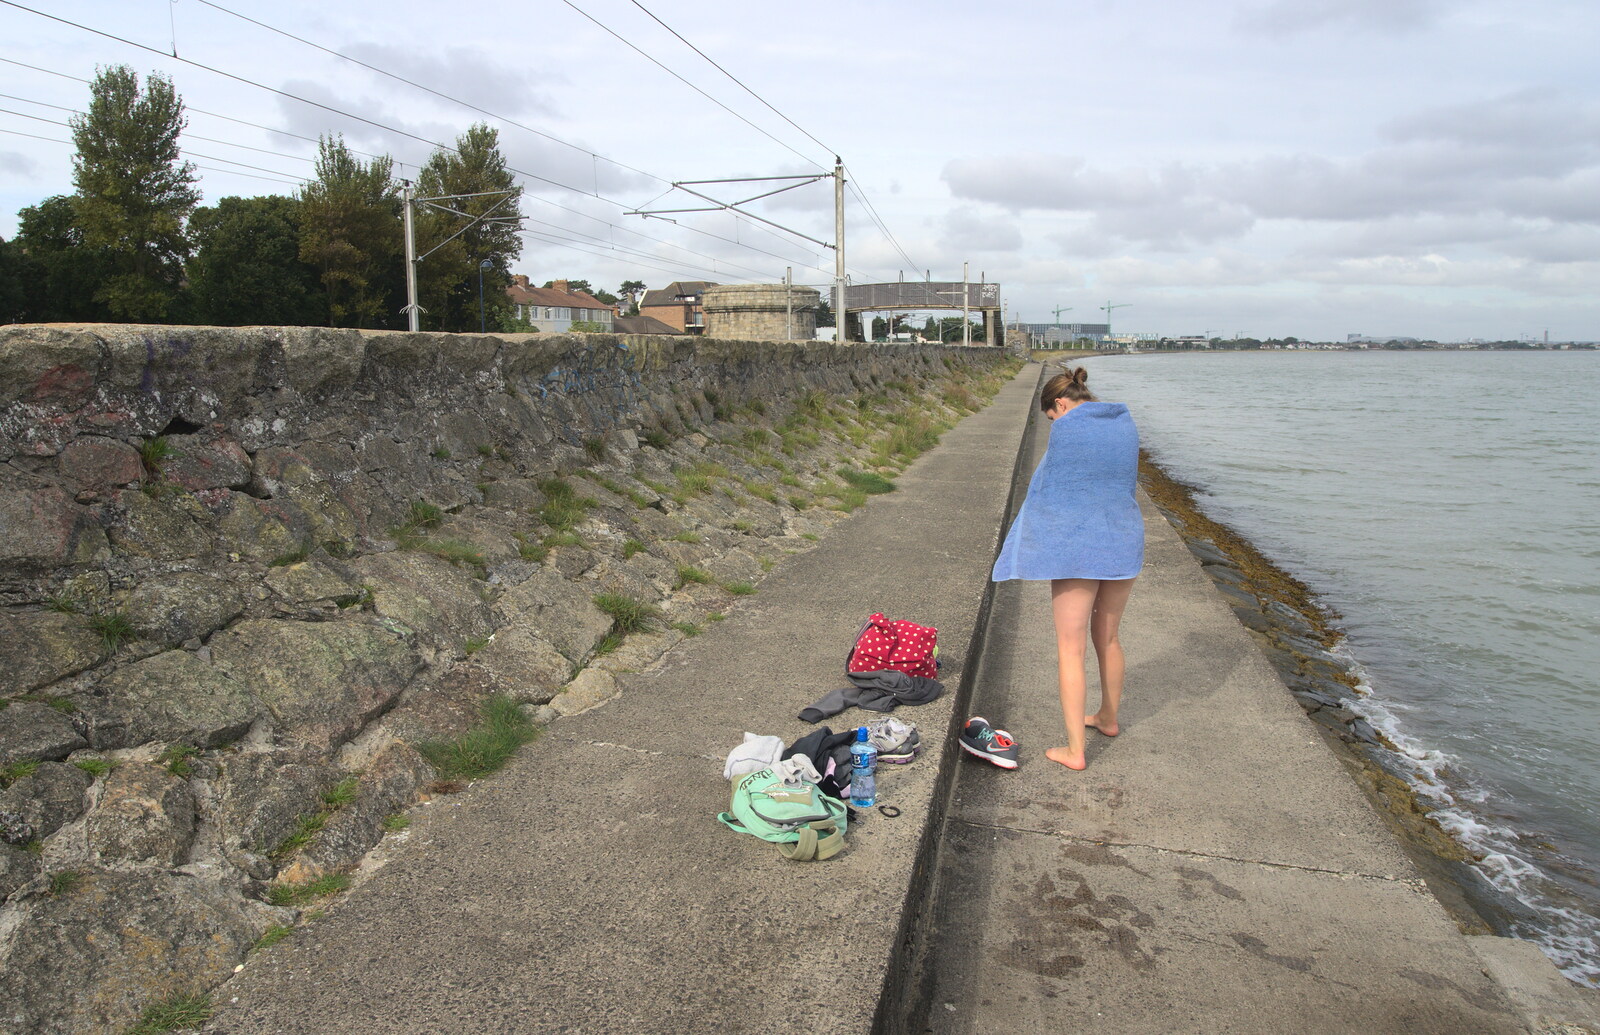 Isobel towels off from Sion Hill and Blackrock for the Day, Dublin, Ireland - 17th September 2016